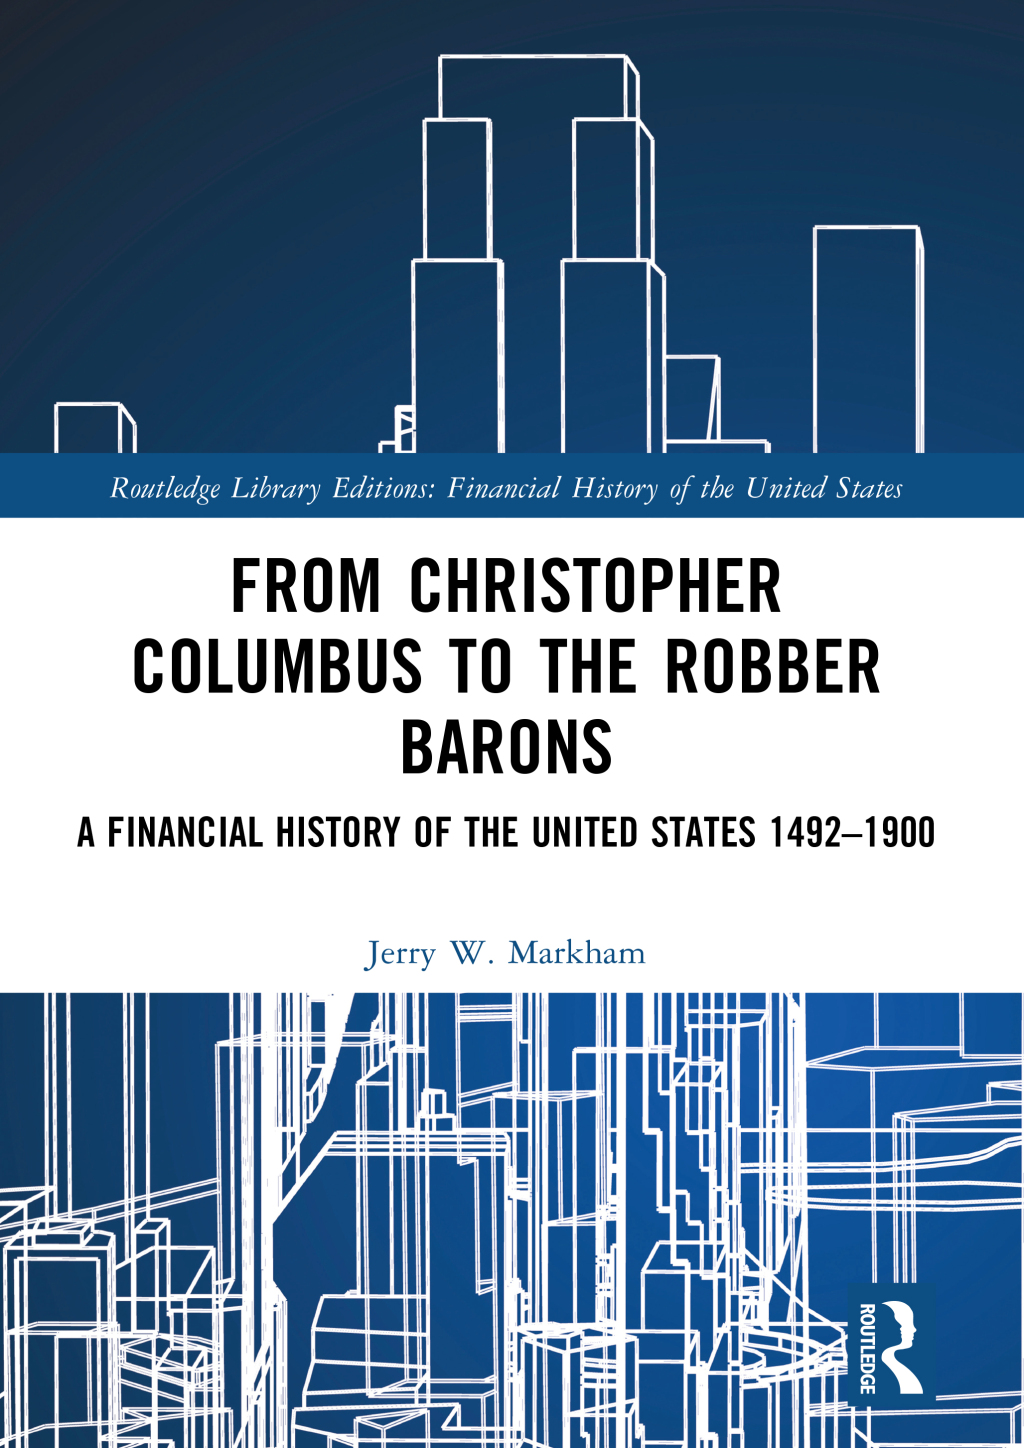 From Christopher Columbus to the Robber Barons: A Financial History of the United States 1492-1900 Jerry W. Markham Author